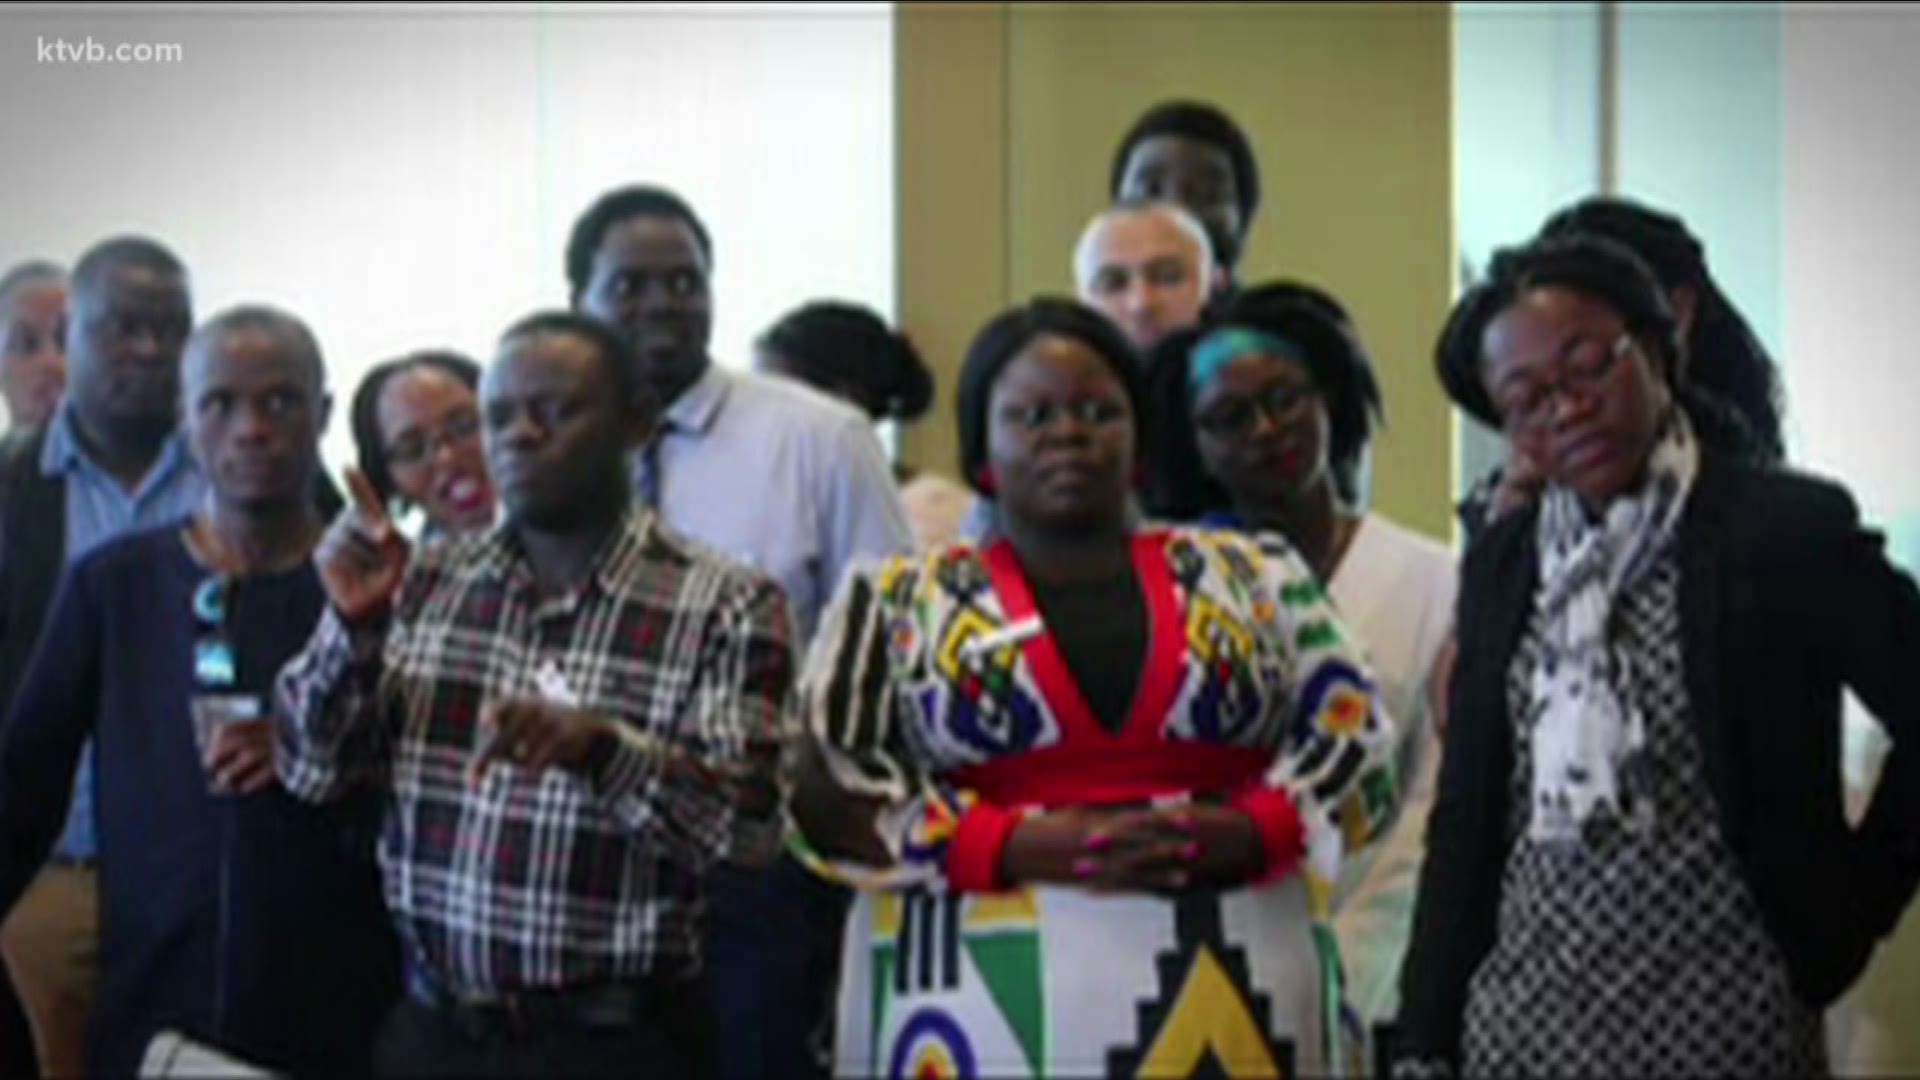 They are in Idaho as part of the U.S. Department of State's Mandela Washington Fellowship.